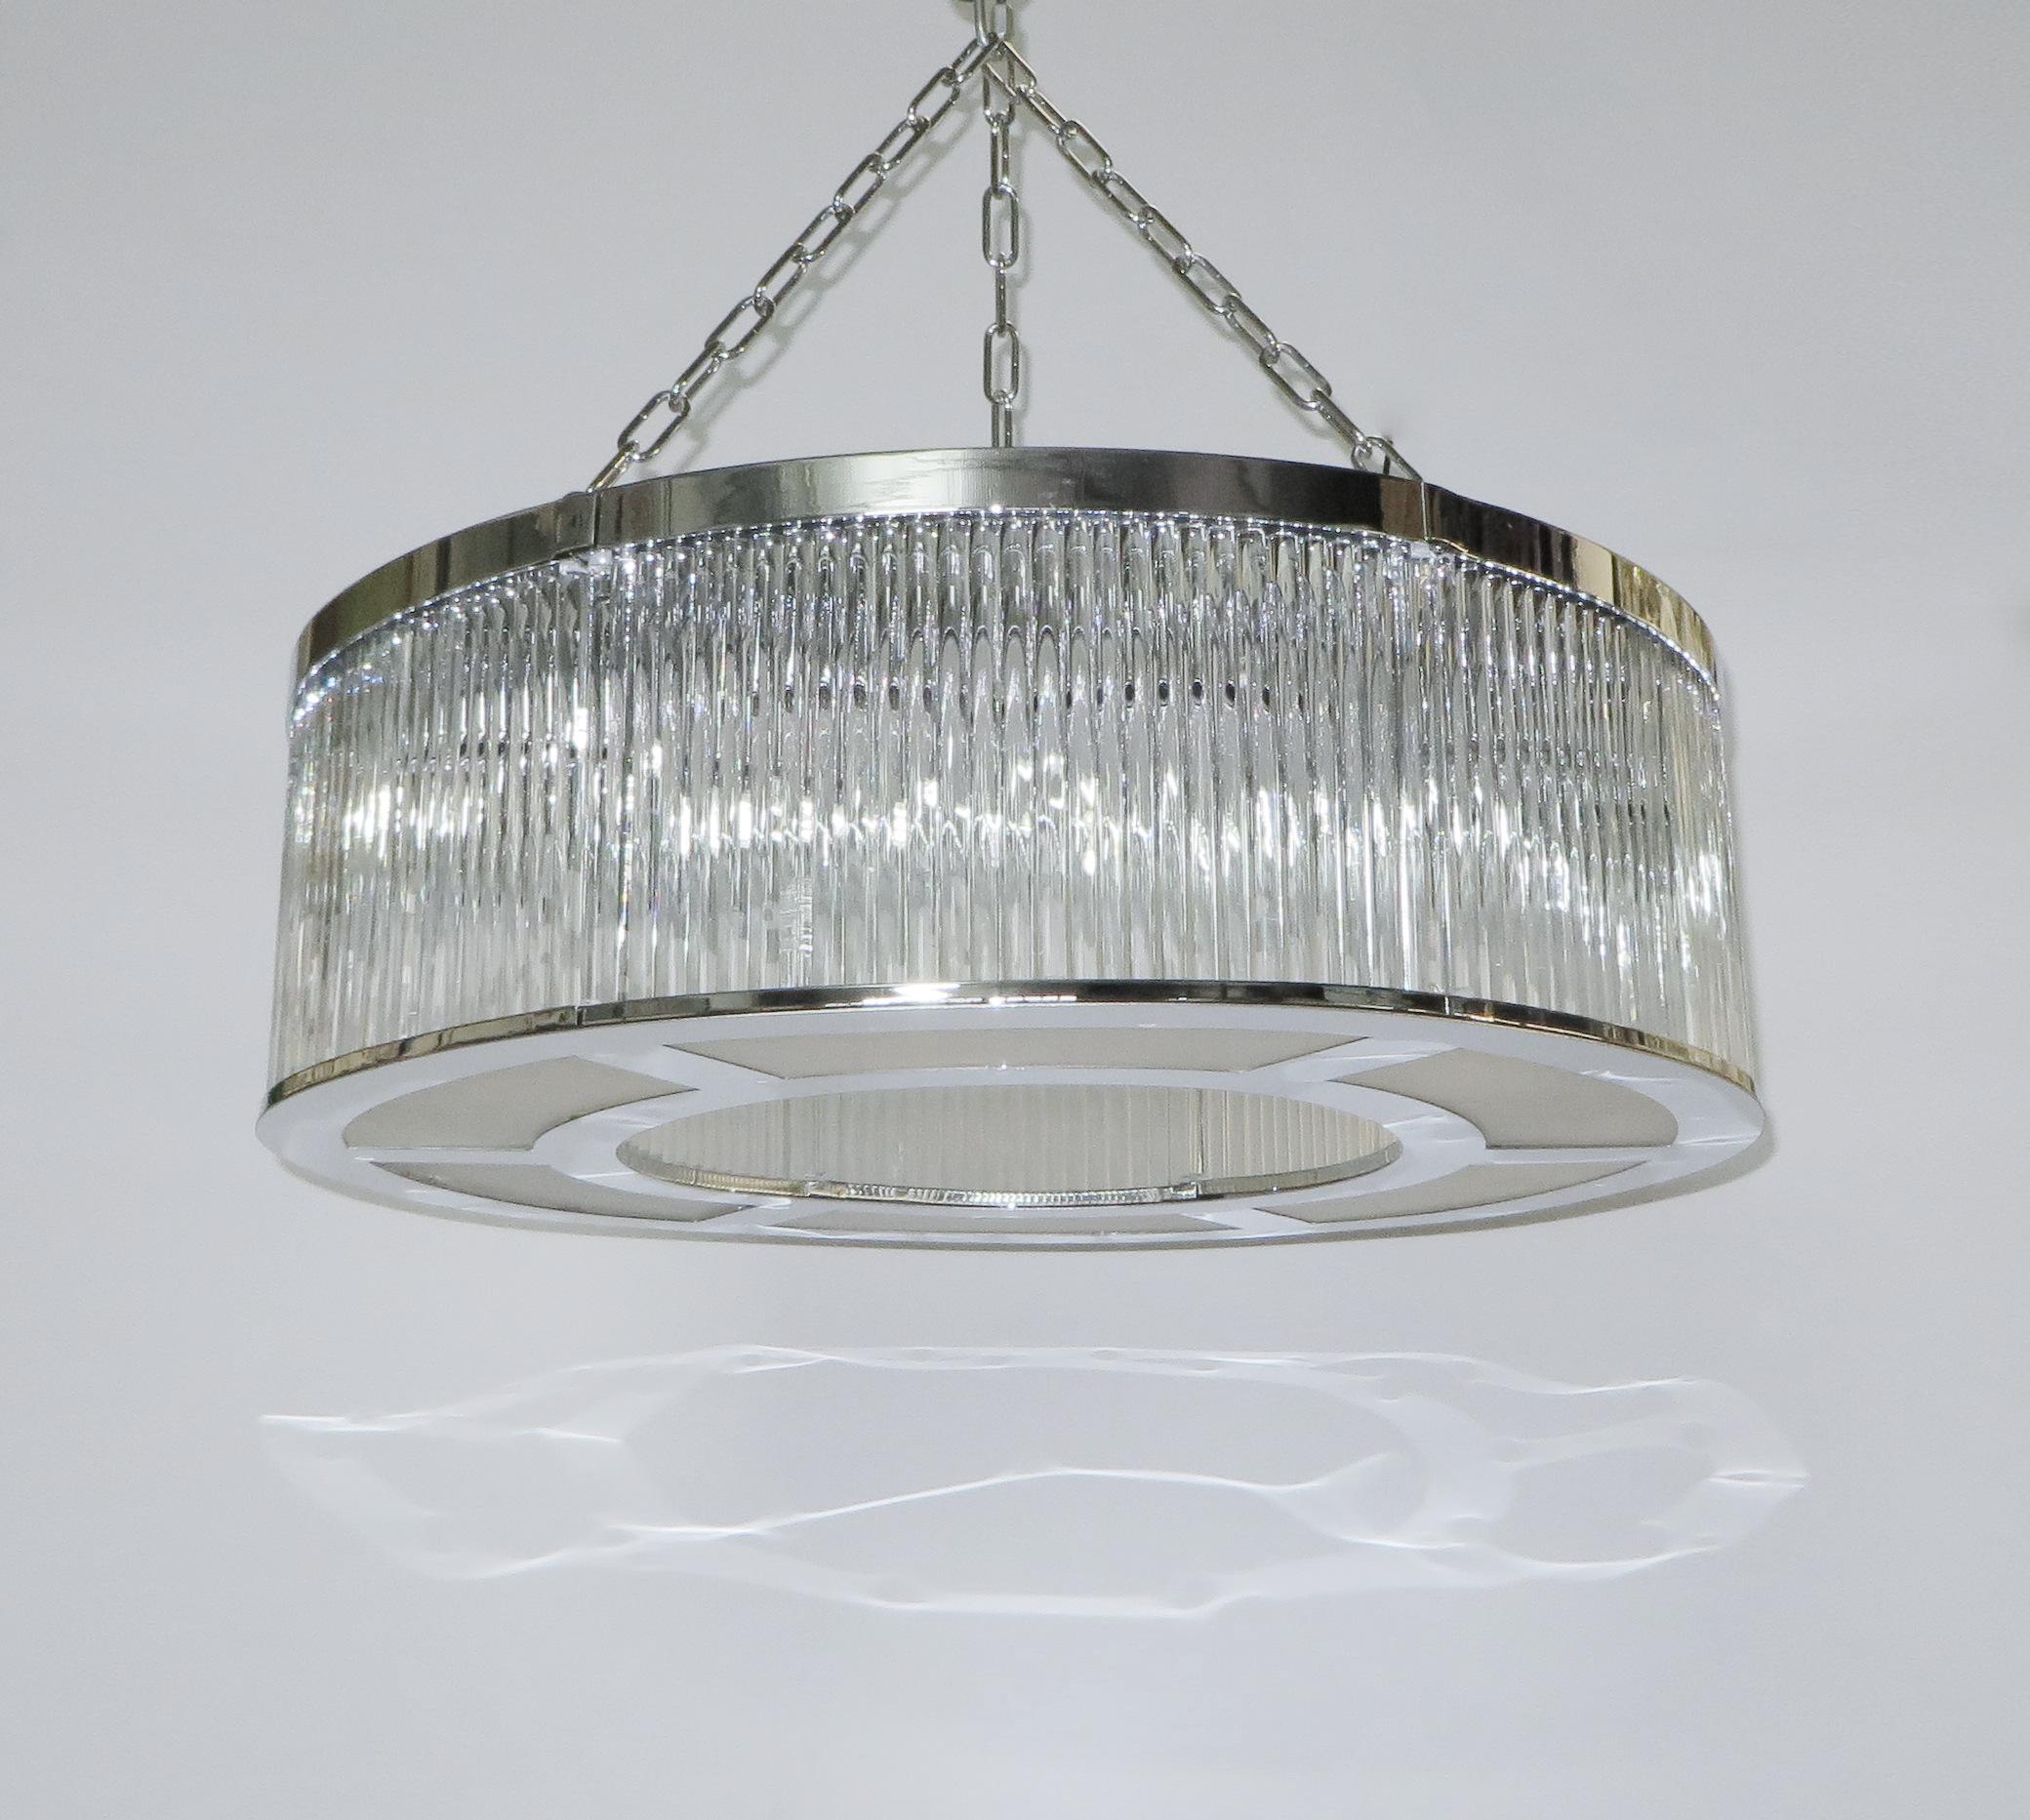 Italian art deco style drum chandelier with double layers of thin clear Murano glass rods mounted on chrome finish structure / Made in Italy by Fabio Ltd
8 lights / E26 or E27 type / max 60W each
Measures: diameter 31.5 inches, height 12 inches plus